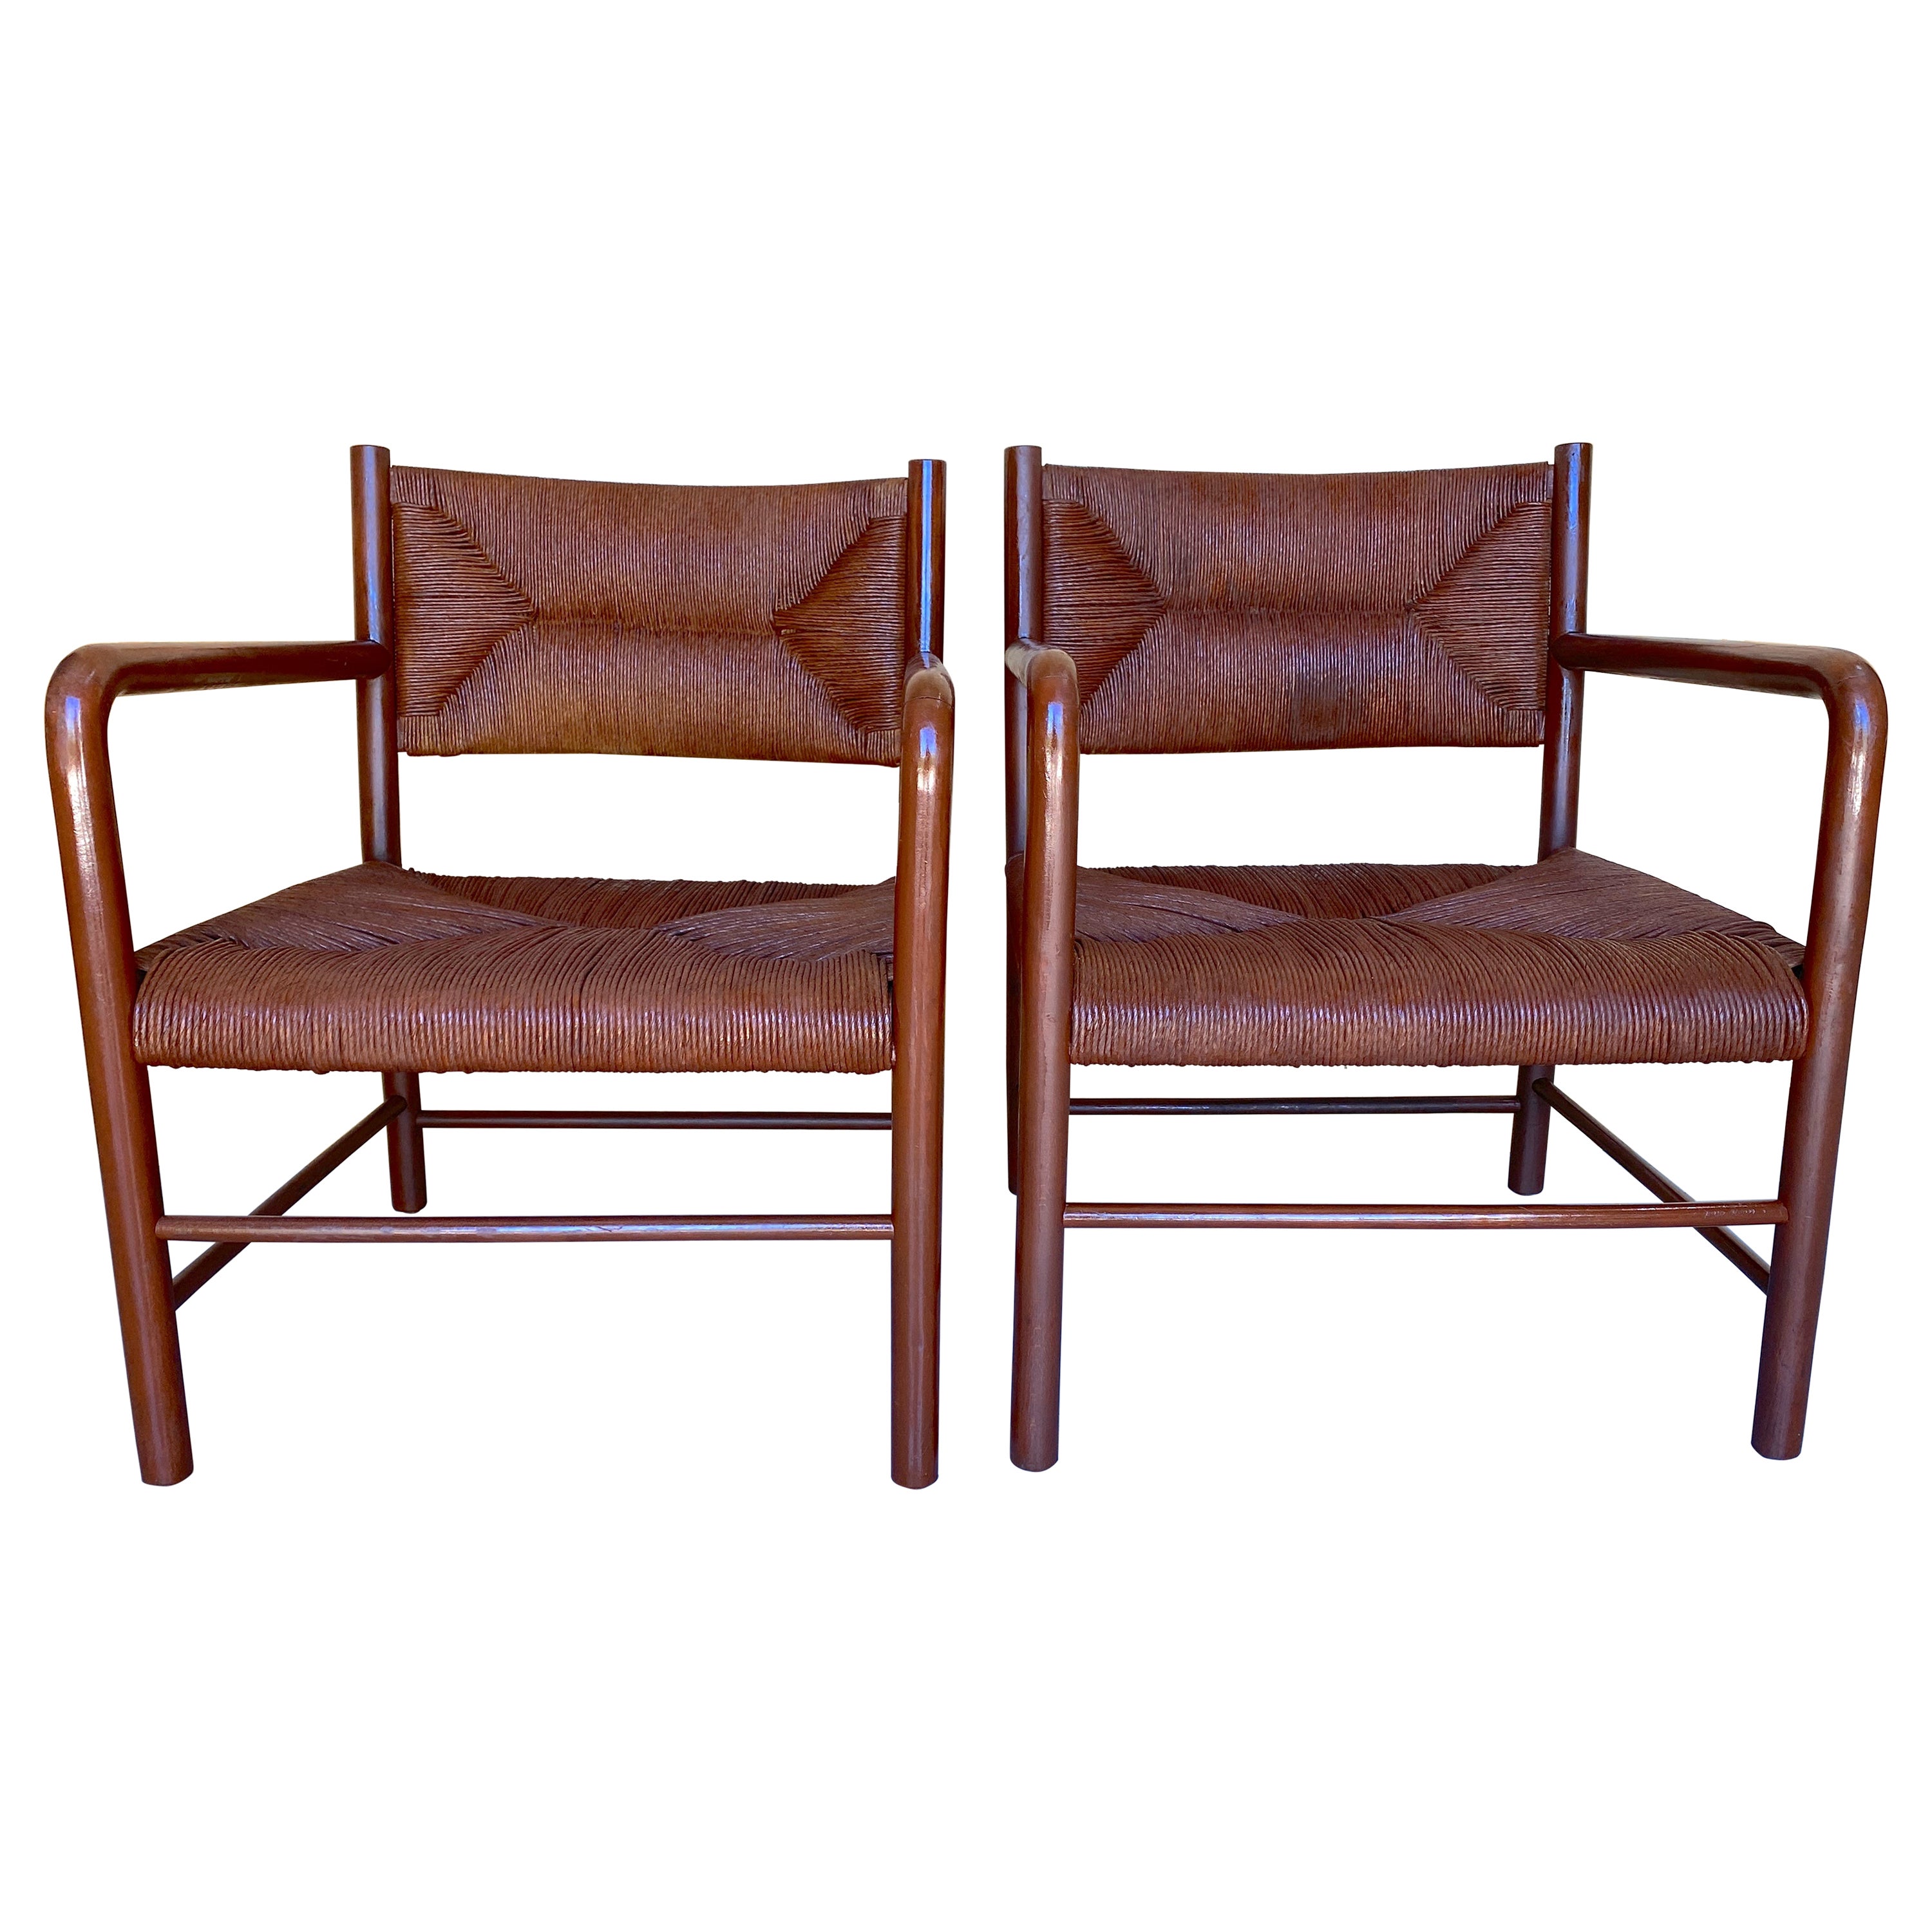 Pair of Emanuele Rambaldi Modernist Brown Lacquered Armchairs, Italy 1940s